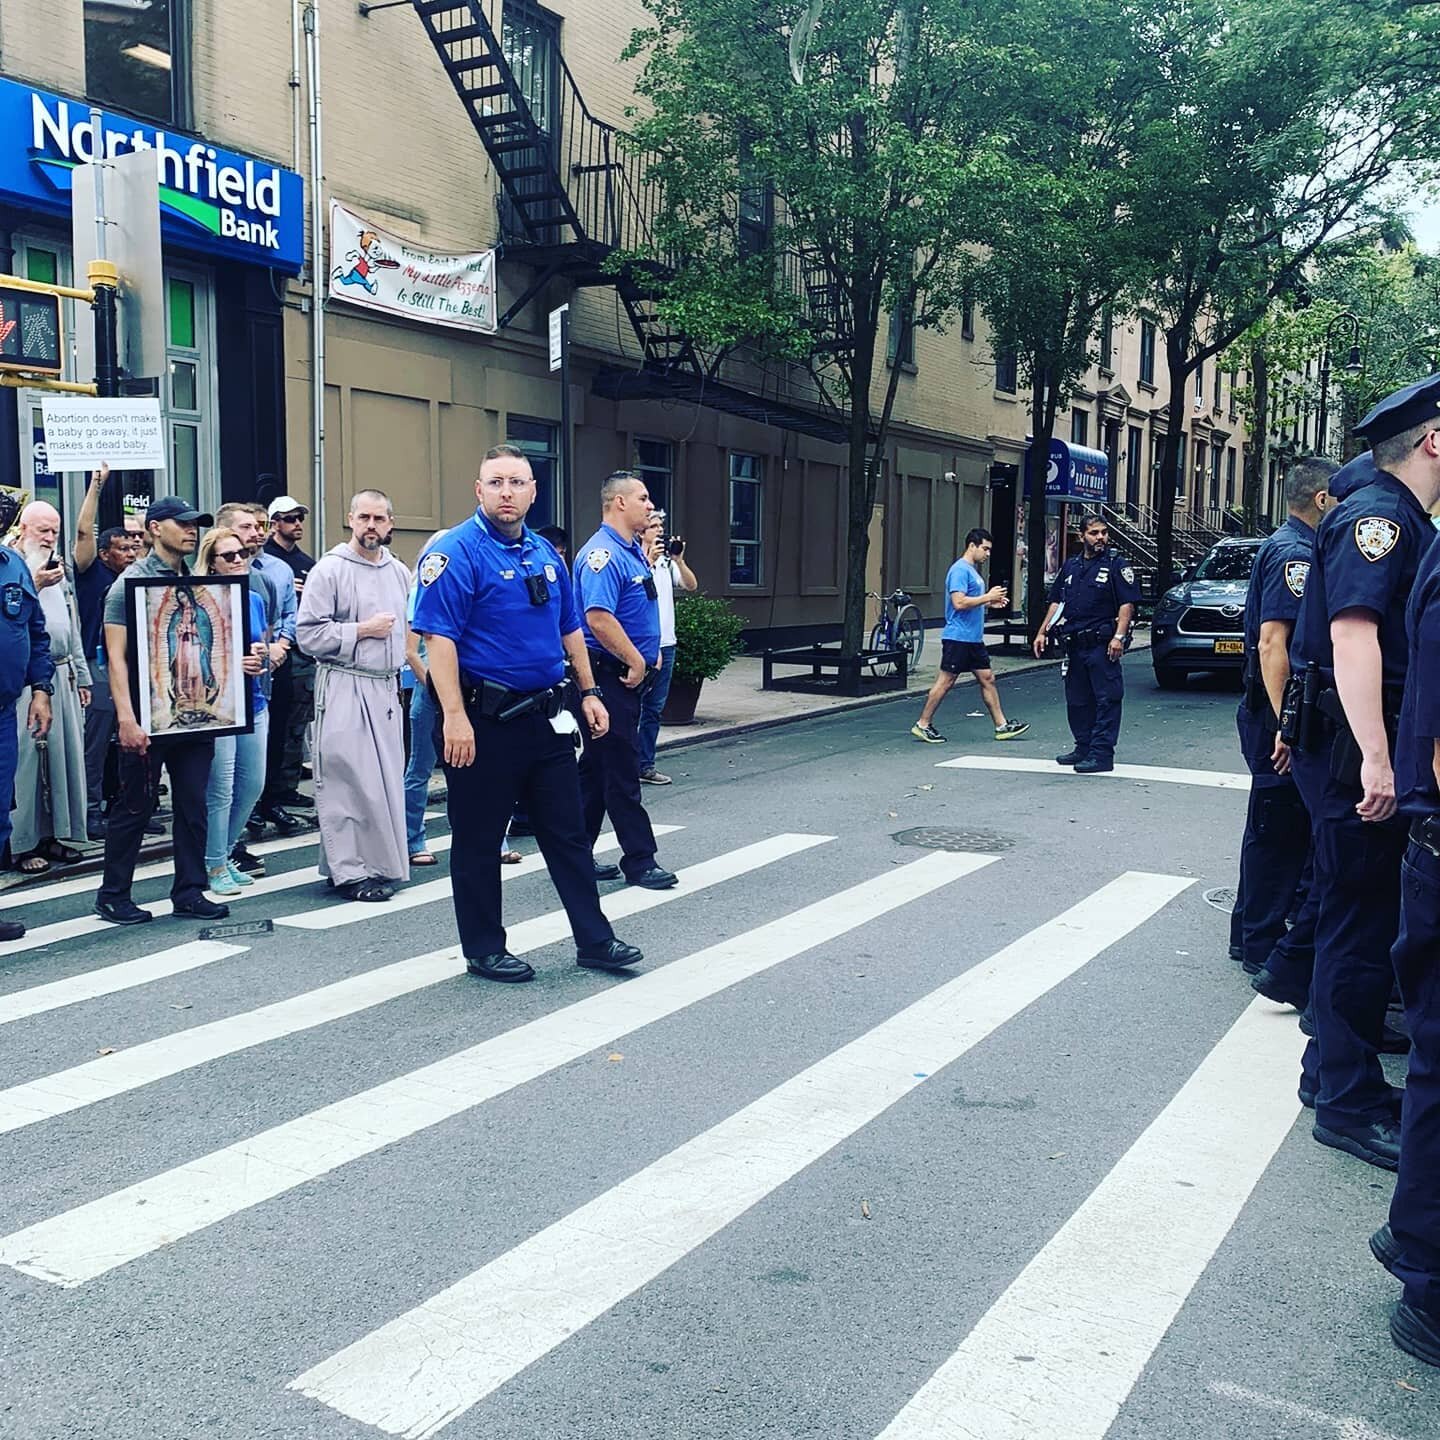 Catholics had to be protected by NYPD today as they marched from St. Paul's Church in New York to a local abortuary. 

Anti baby activists protested with signs such as 'abortion is freedom' and 'God loves abortion', screaming obscenities as Mass took